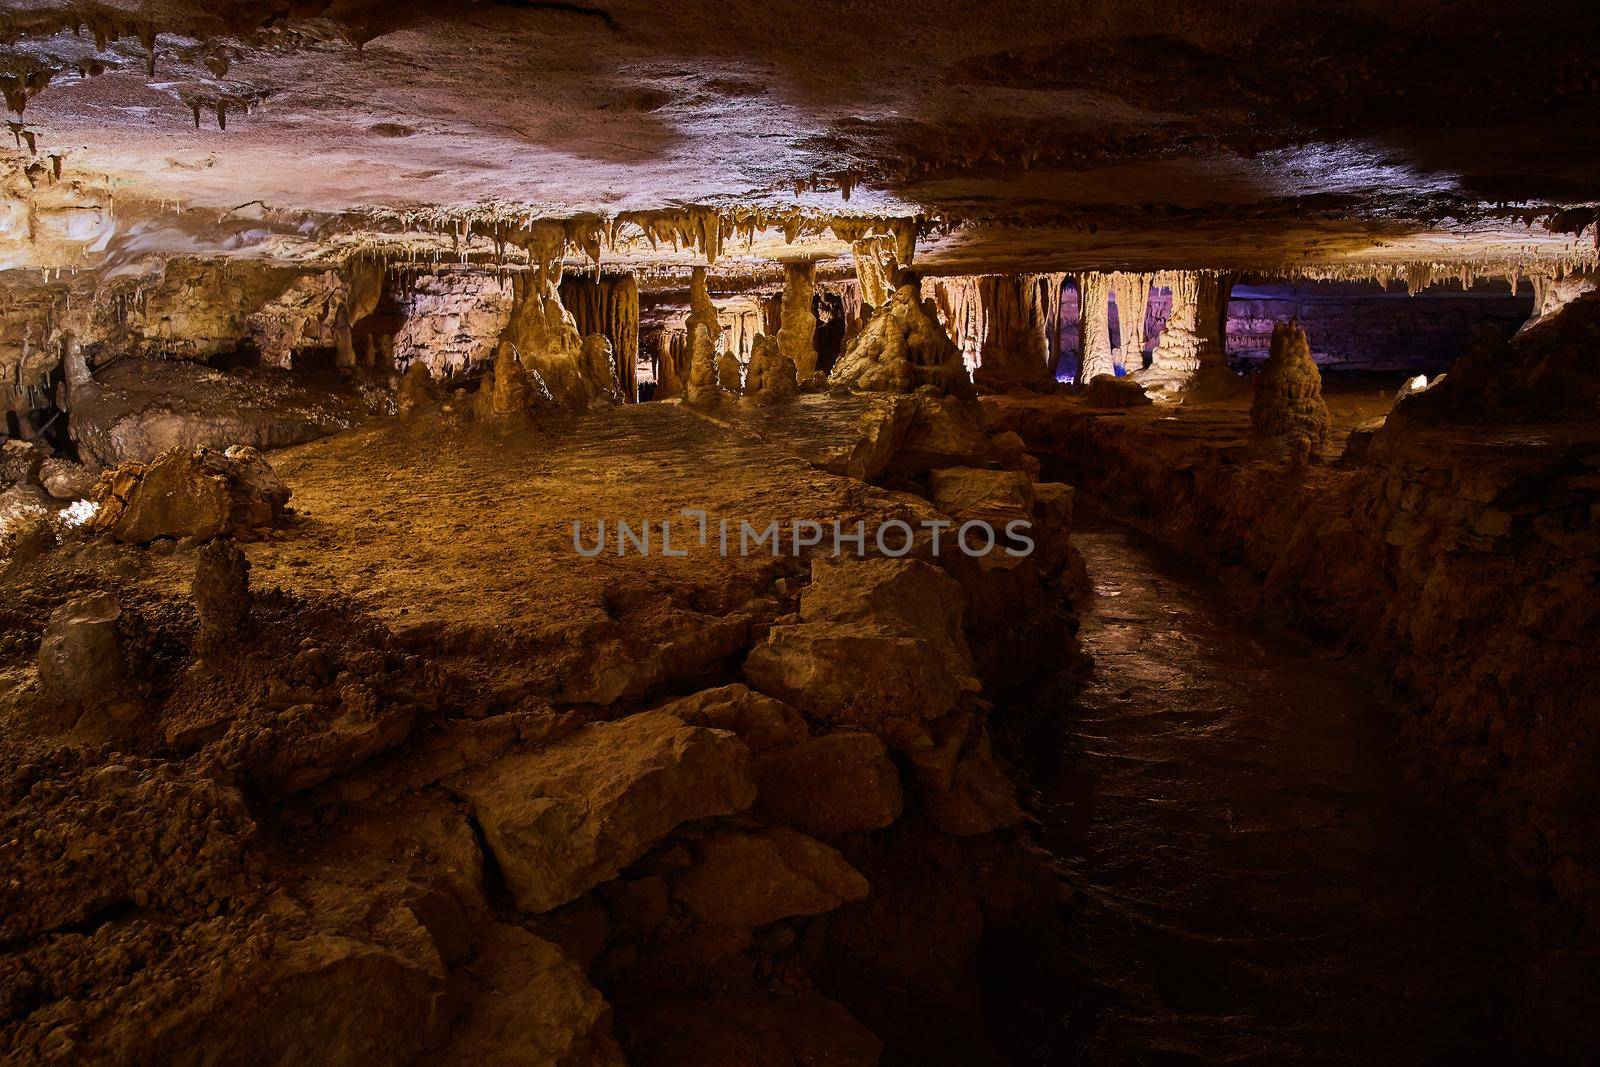 Narrow cave filled with formations of stalagmites and stalactites by njproductions